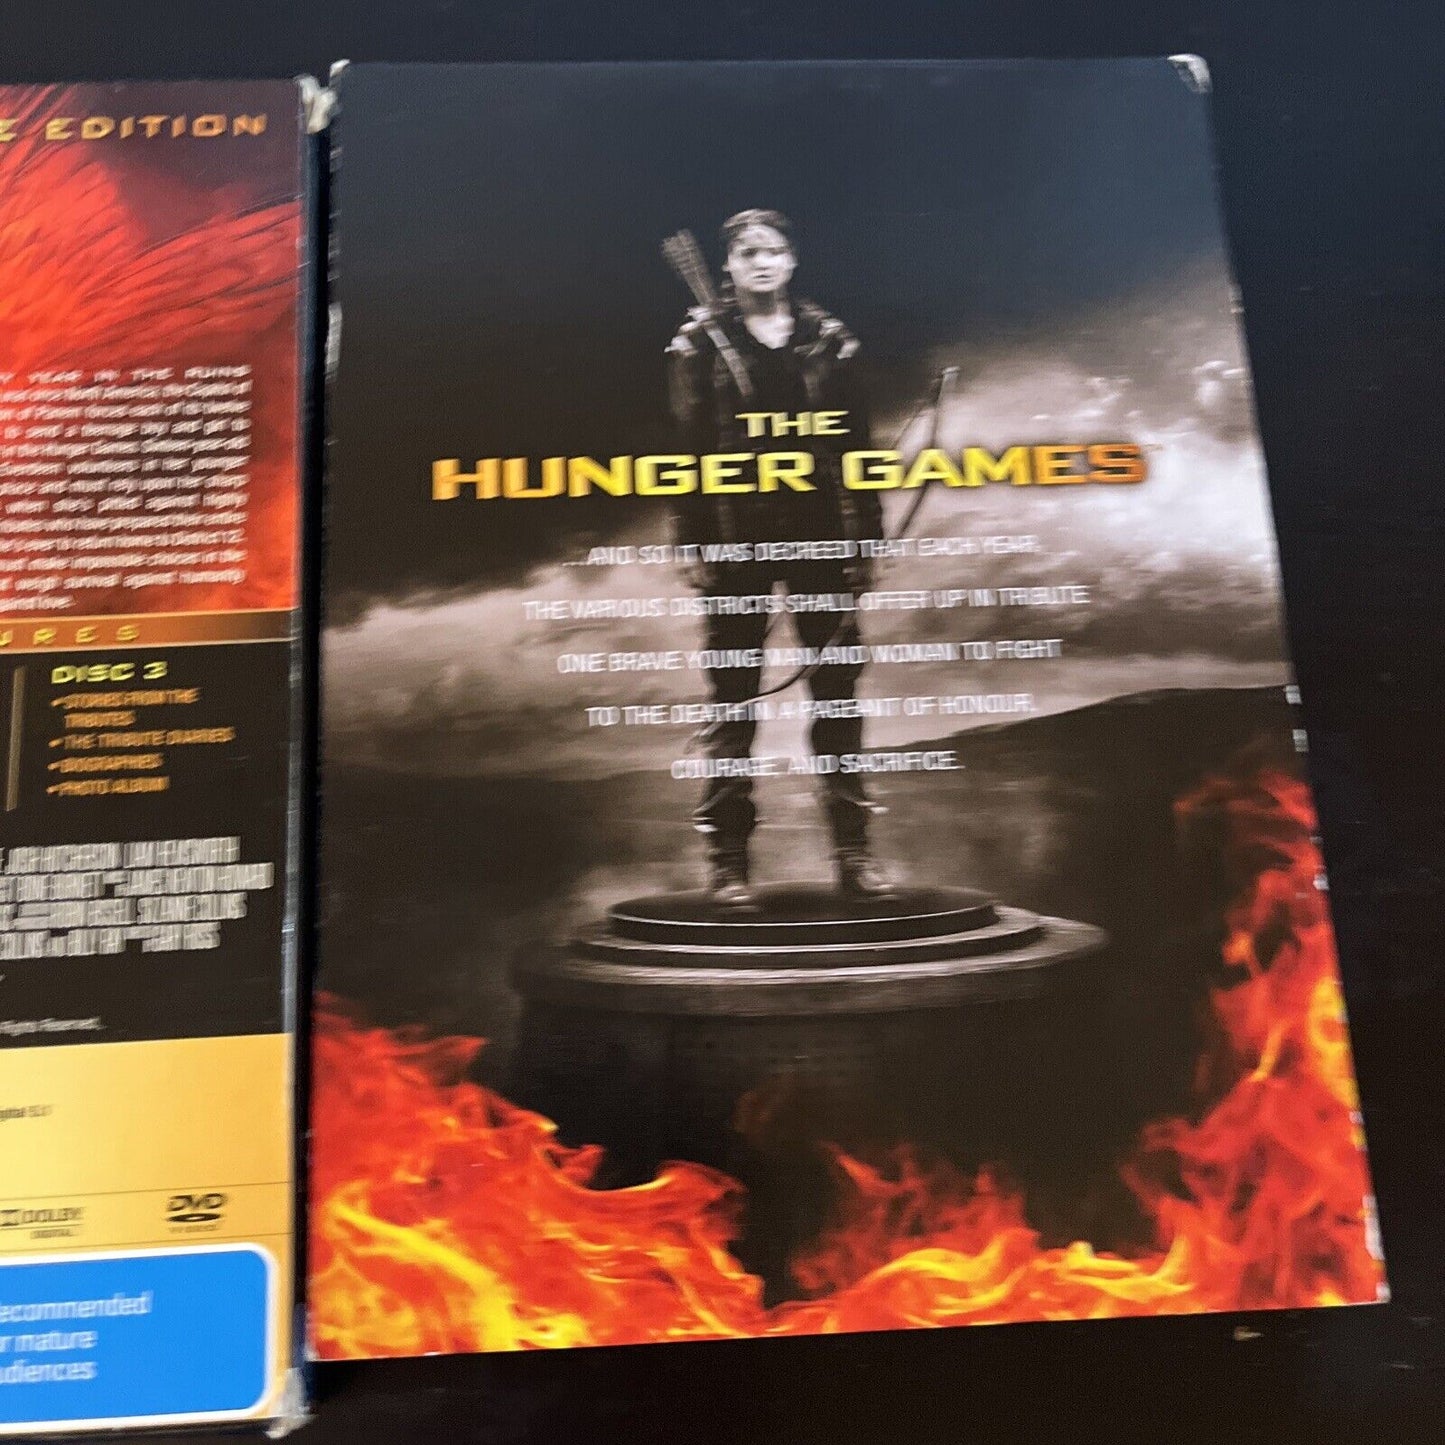 The Hunger Games - Deluxe Edition (DVD, 2011, 3-Disc) Jennifer Lawrence Region 4